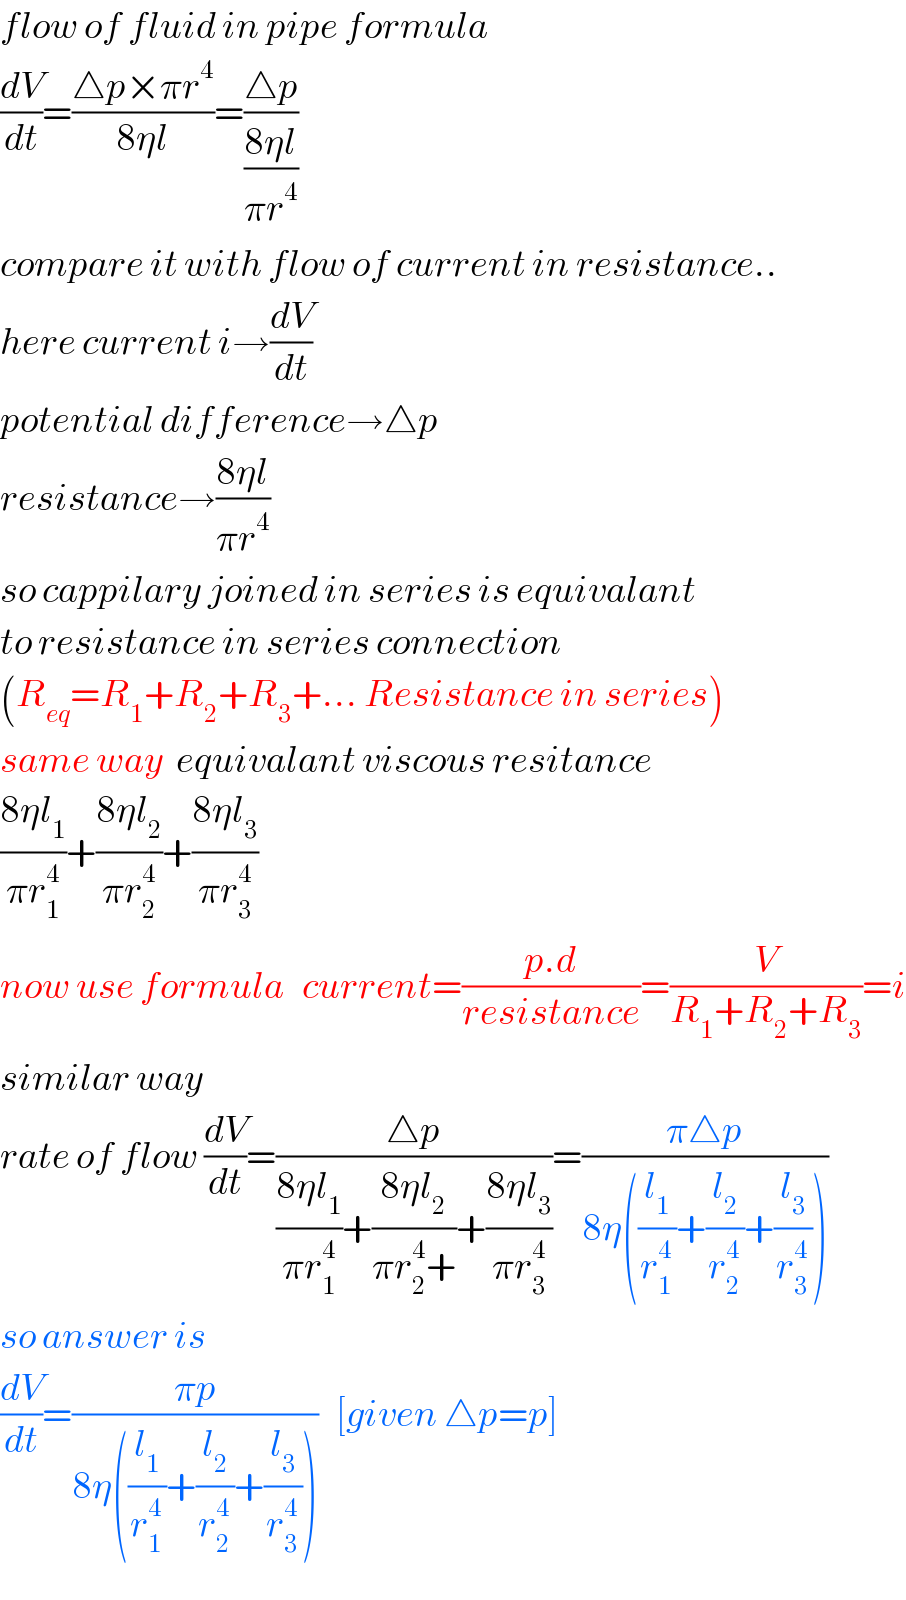 flow of fluid in pipe formula  (dV/dt)=((△p×πr^4 )/(8ηl))=((△p)/((8ηl)/(πr^4 )))  compare it with flow of current in resistance..  here current i→(dV/dt)  potential difference→△p  resistance→((8ηl)/(πr^4 ))  so cappilary joined in series is equivalant  to resistance in series connection  (R_(eq) =R_1 +R_2 +R_3 +... Resistance in series)  same way  equivalant viscous resitance  ((8ηl_1 )/(πr_1 ^4 ))+((8ηl_2 )/(πr_2 ^4 ))+((8ηl_3 )/(πr_3 ^4 ))  now use formula   current=((p.d)/(resistance))=(V/(R_1 +R_2 +R_3 ))=i  similar way  rate of flow (dV/dt)=((△p)/(((8ηl_1 )/(πr_1 ^4 ))+((8ηl_2 )/(πr_2 ^4 +))+((8ηl_3 )/(πr_3 ^4 ))))=((π△p)/(8η((l_1 /r_1 ^4 )+(l_2 /r_2 ^4 )+(l_3 /r_3 ^4 ))))  so answer is  (dV/dt)=((πp)/(8η((l_1 /r_1 ^4 )+(l_2 /r_2 ^4 )+(l_3 /r_3 ^4 ))))   [given △p=p]  